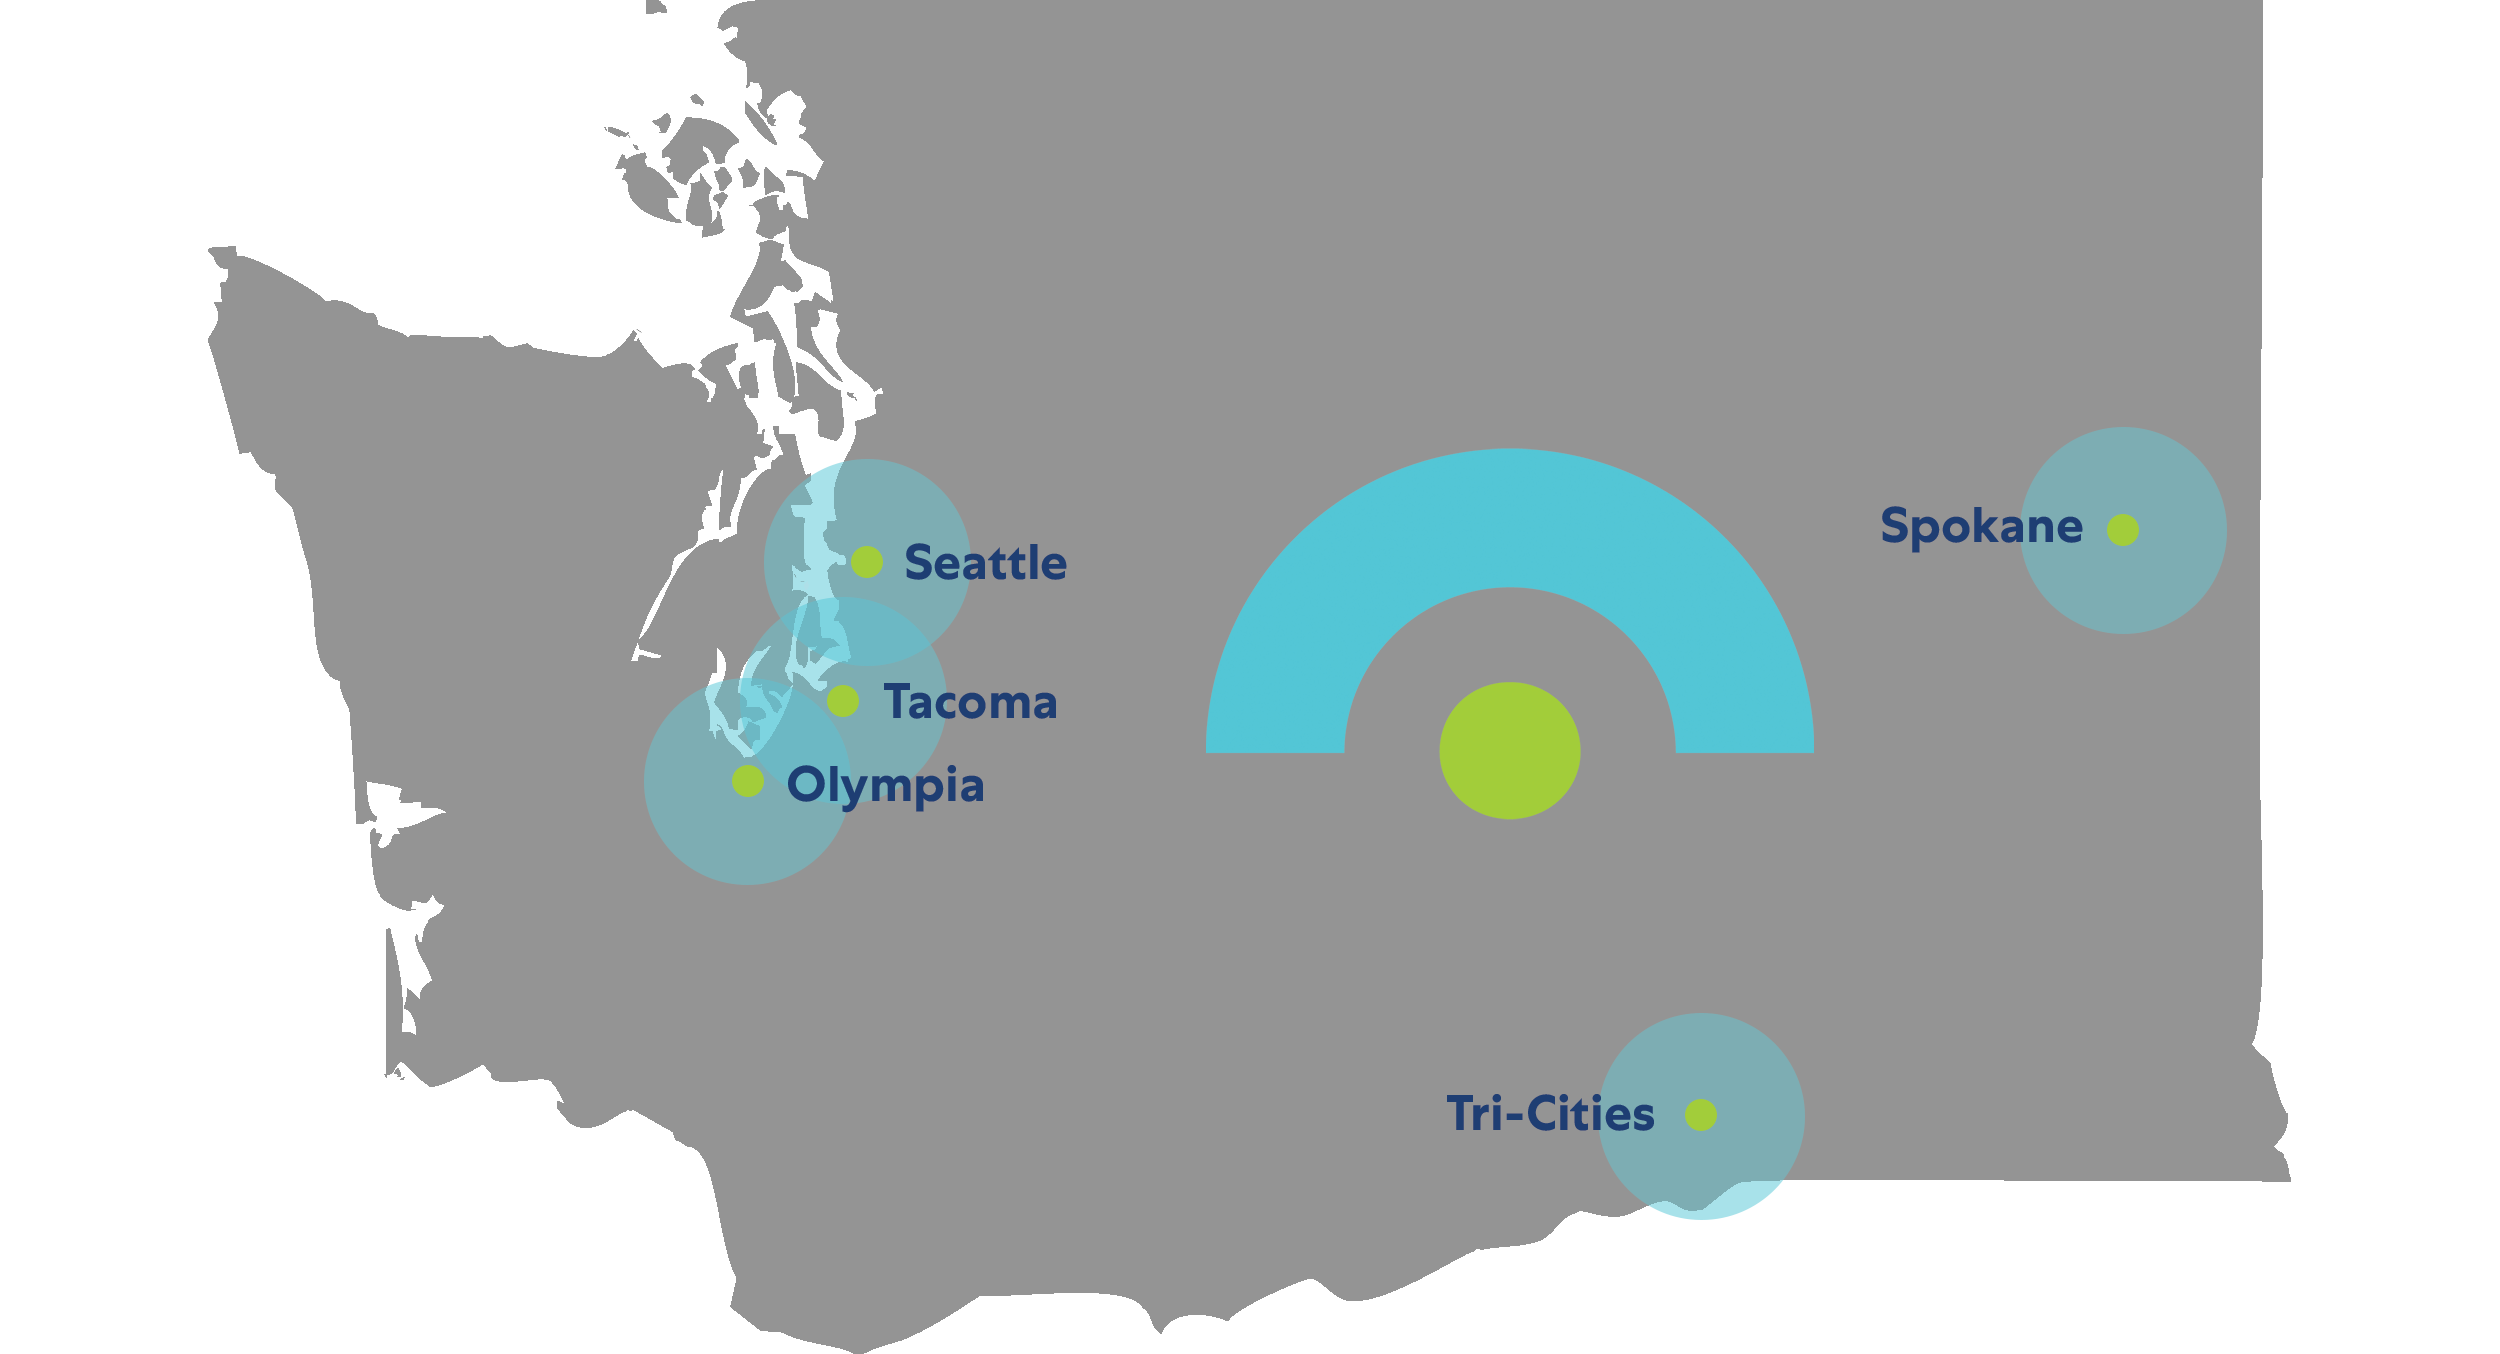 A map of Washington state showing Embright location pins in Seattle, Tacoma, Olympia, Tri-Cities, and Spokane